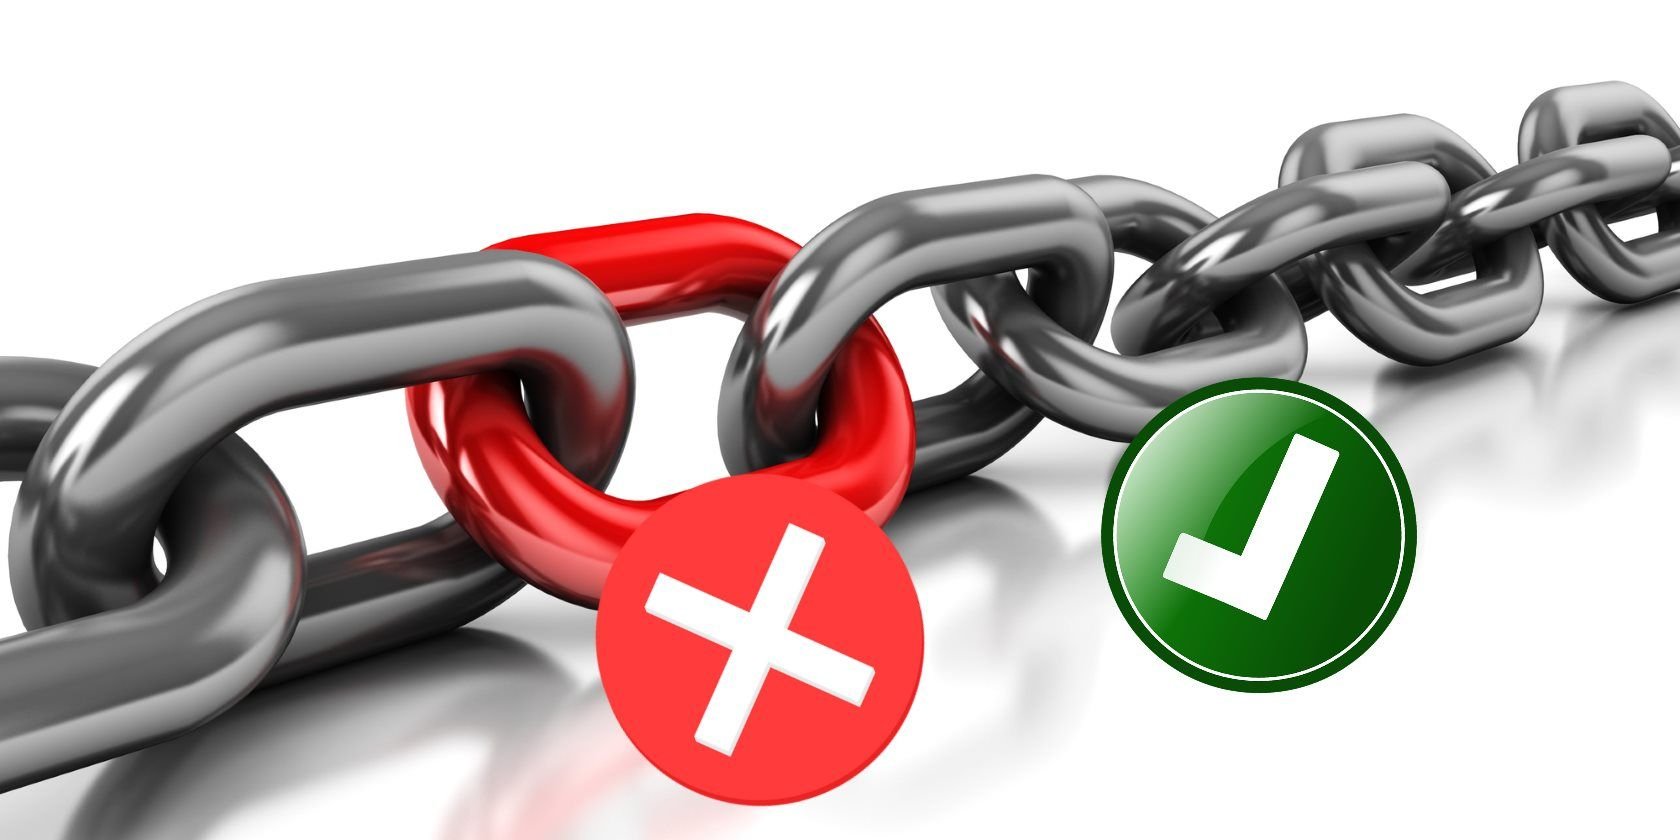 8 Quick Sites That Let You Check If a Link Is Safe